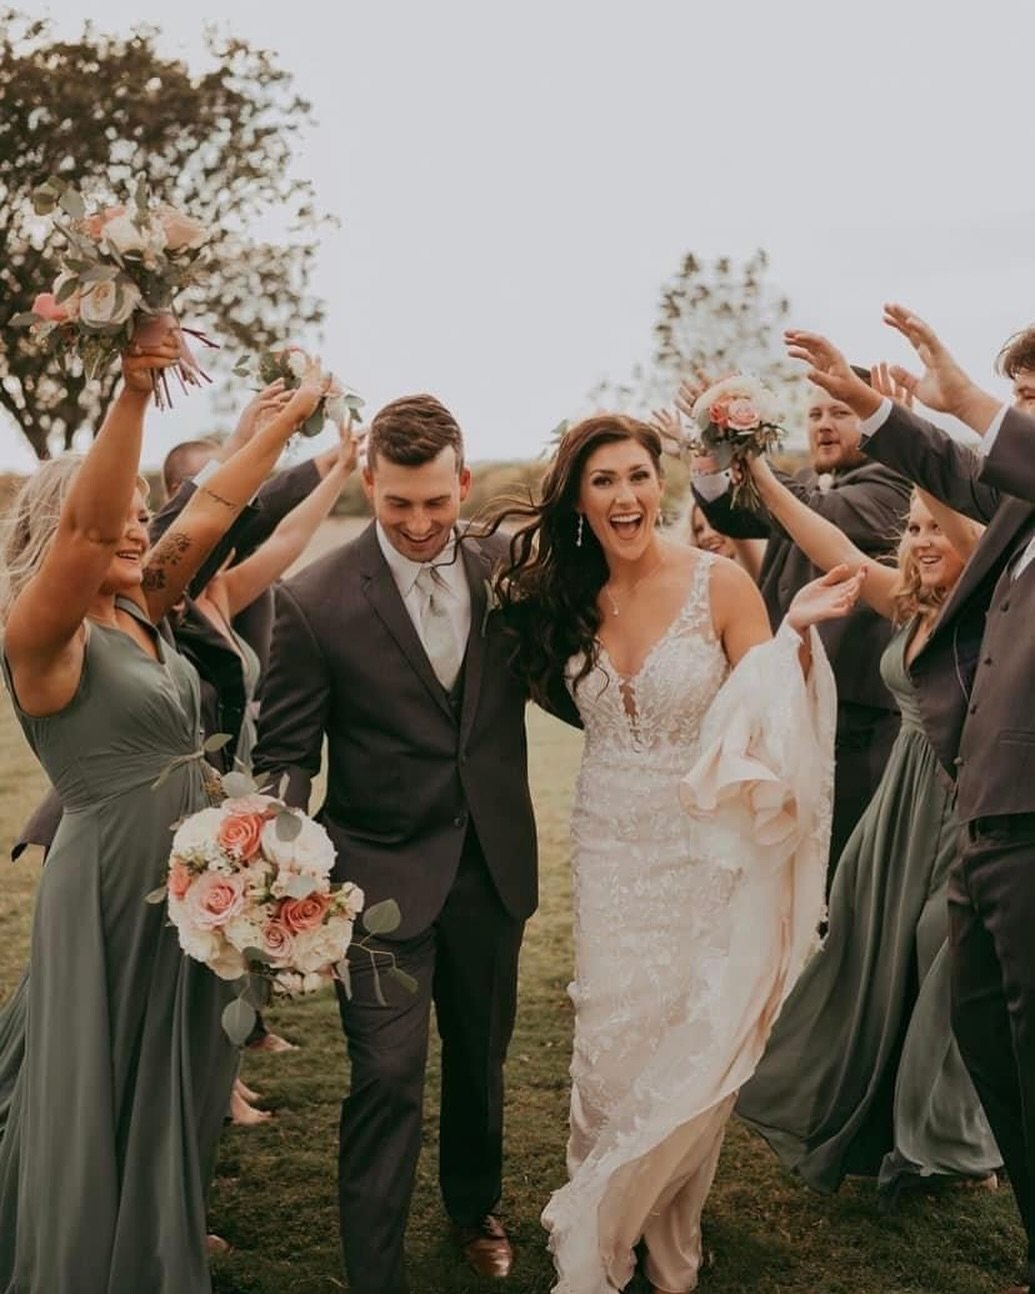 That feeling when you are finally married and enjoying your day because you hired a coordinator to take care of everything for you🤩 

#weddingcoordinator #texasweddings #weddinginspo #weddingdesign #bridetobe #bookyourvendors